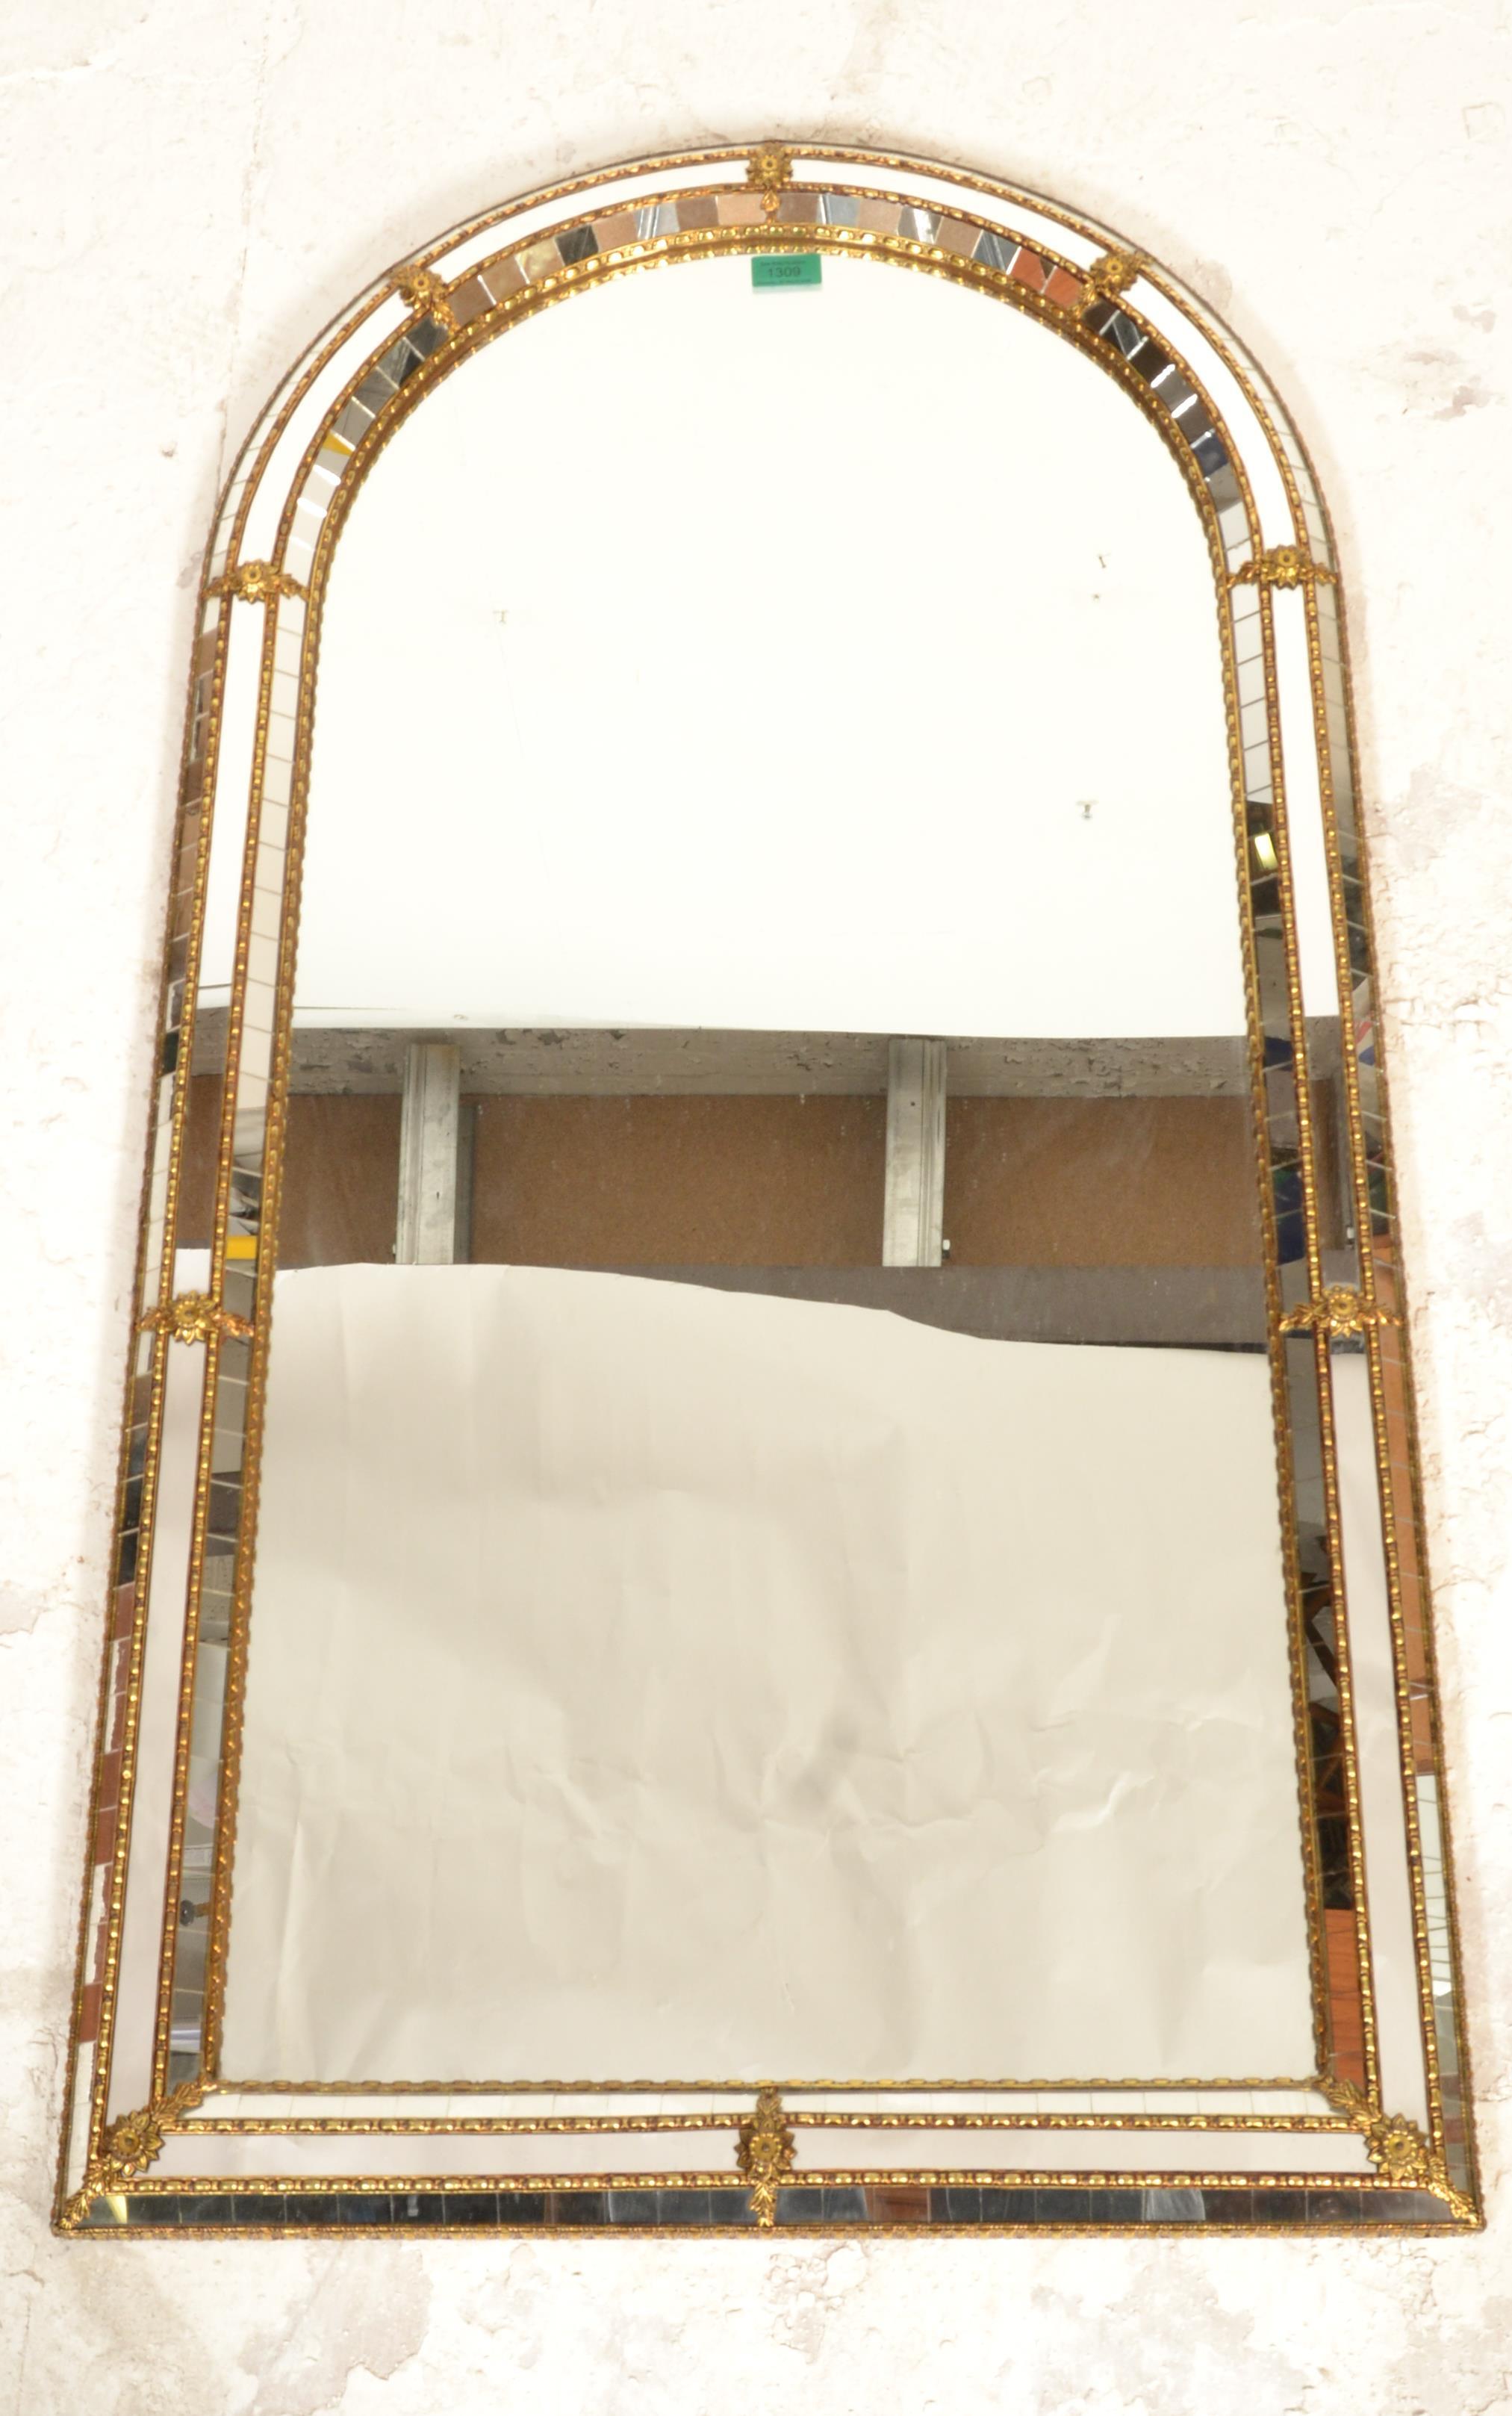 A 20th century Venetian gilt mirror of arched form with cushion border adorned qwith multiple mirror - Image 5 of 7